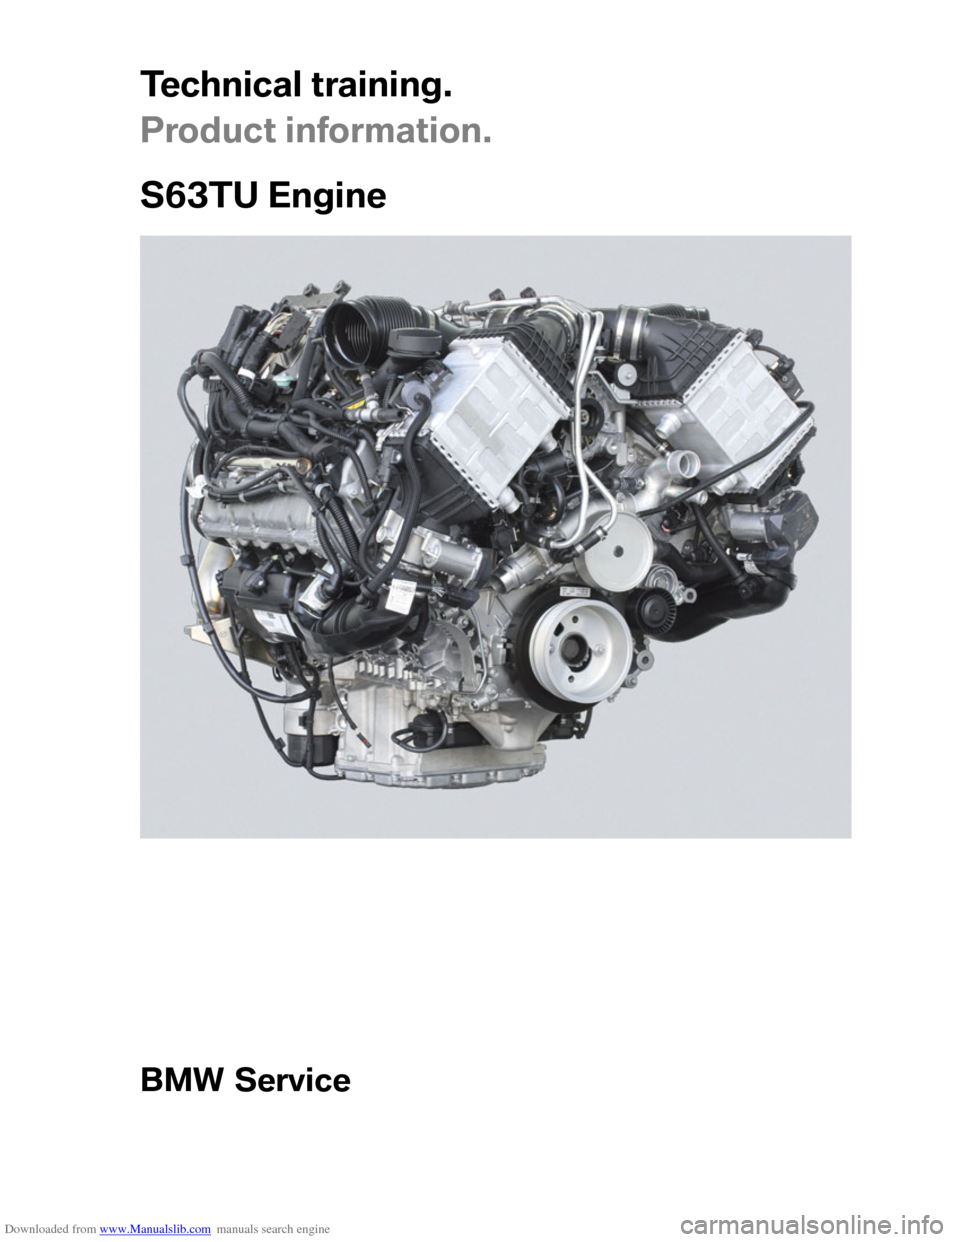 BMW M5 2012 F10 S63TU Engine Technical Training Manual Downloaded from www.Manualslib.com manuals search engine ��
���
����������
��
��
����������
���������
�
���� ��
�����
�������	�
���
�
  